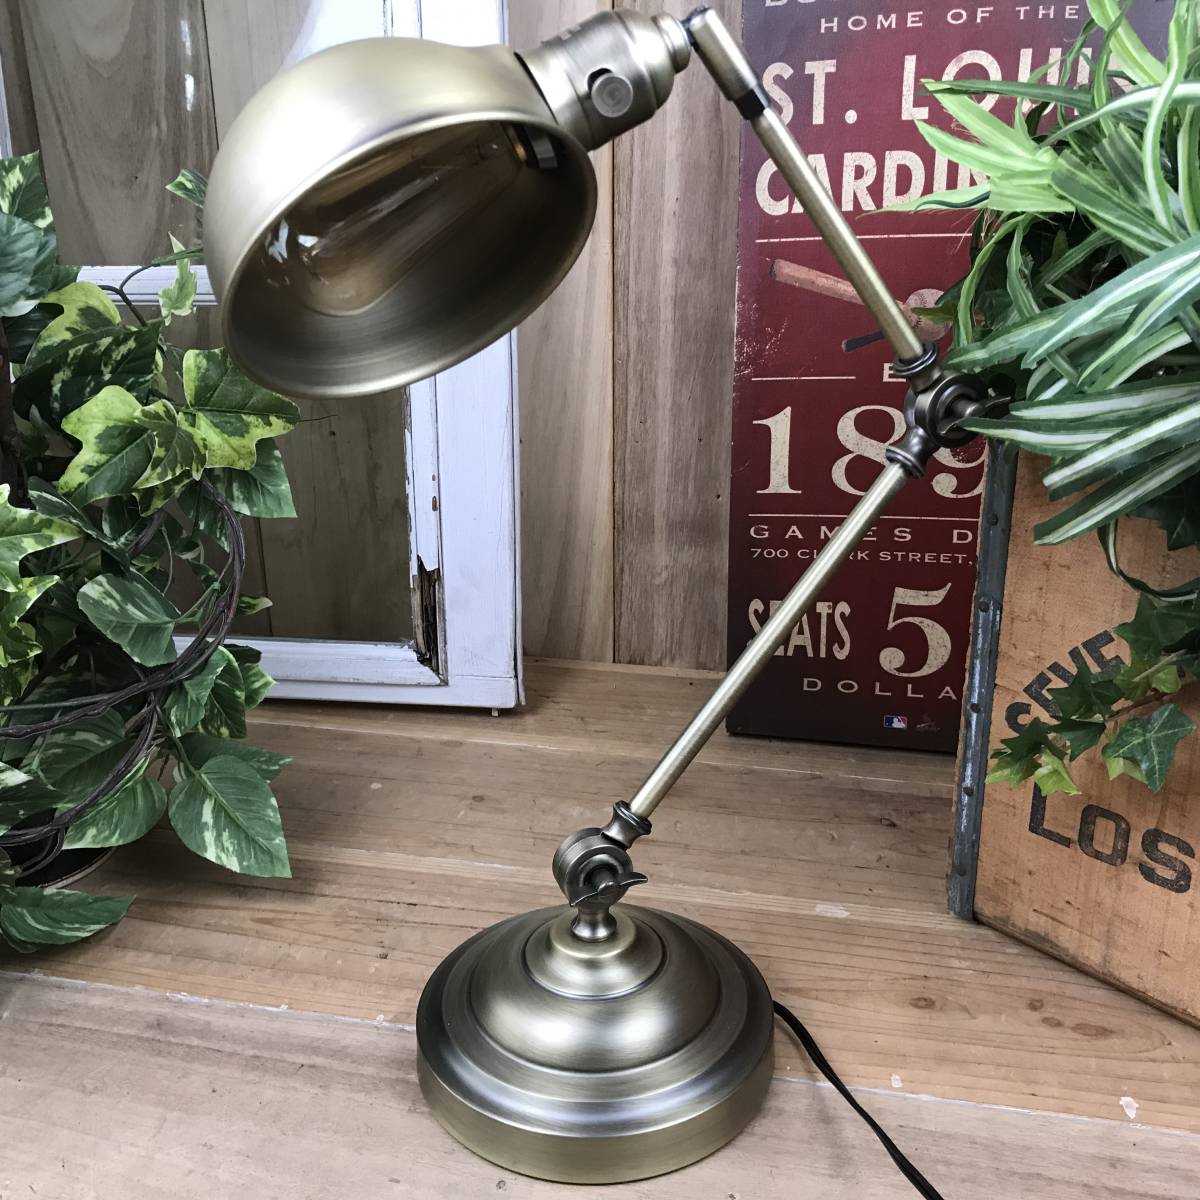  free shipping, in dust real electric light stand Gold * desk tes clamp, black * lighting * antique, Vintage manner,LED lamp correspondence 